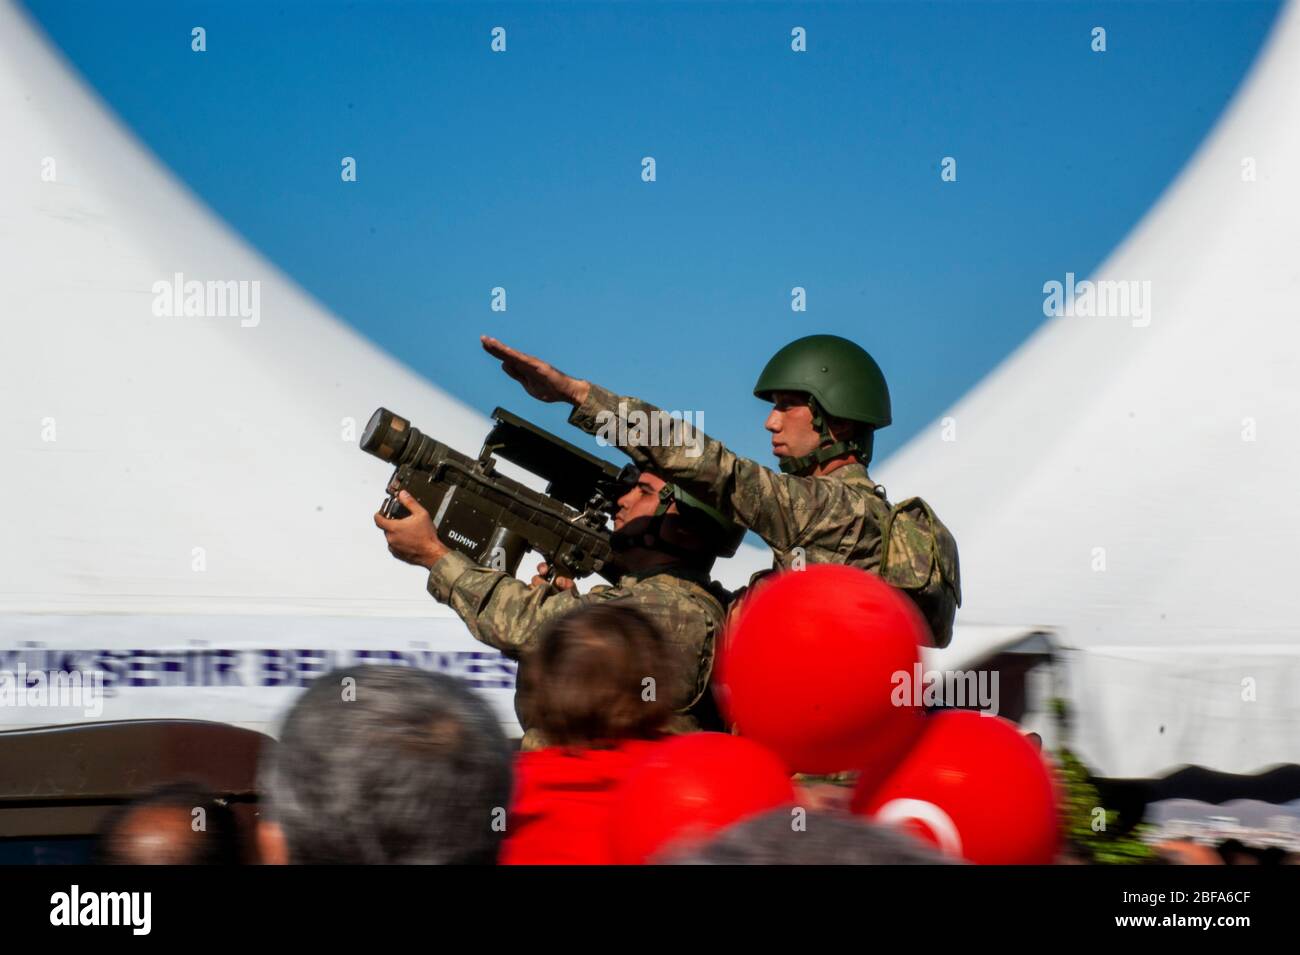 Izmir, Turkey - October 29, 2015: Two soldiers with a rocket launcher one is aiming. Stock Photo